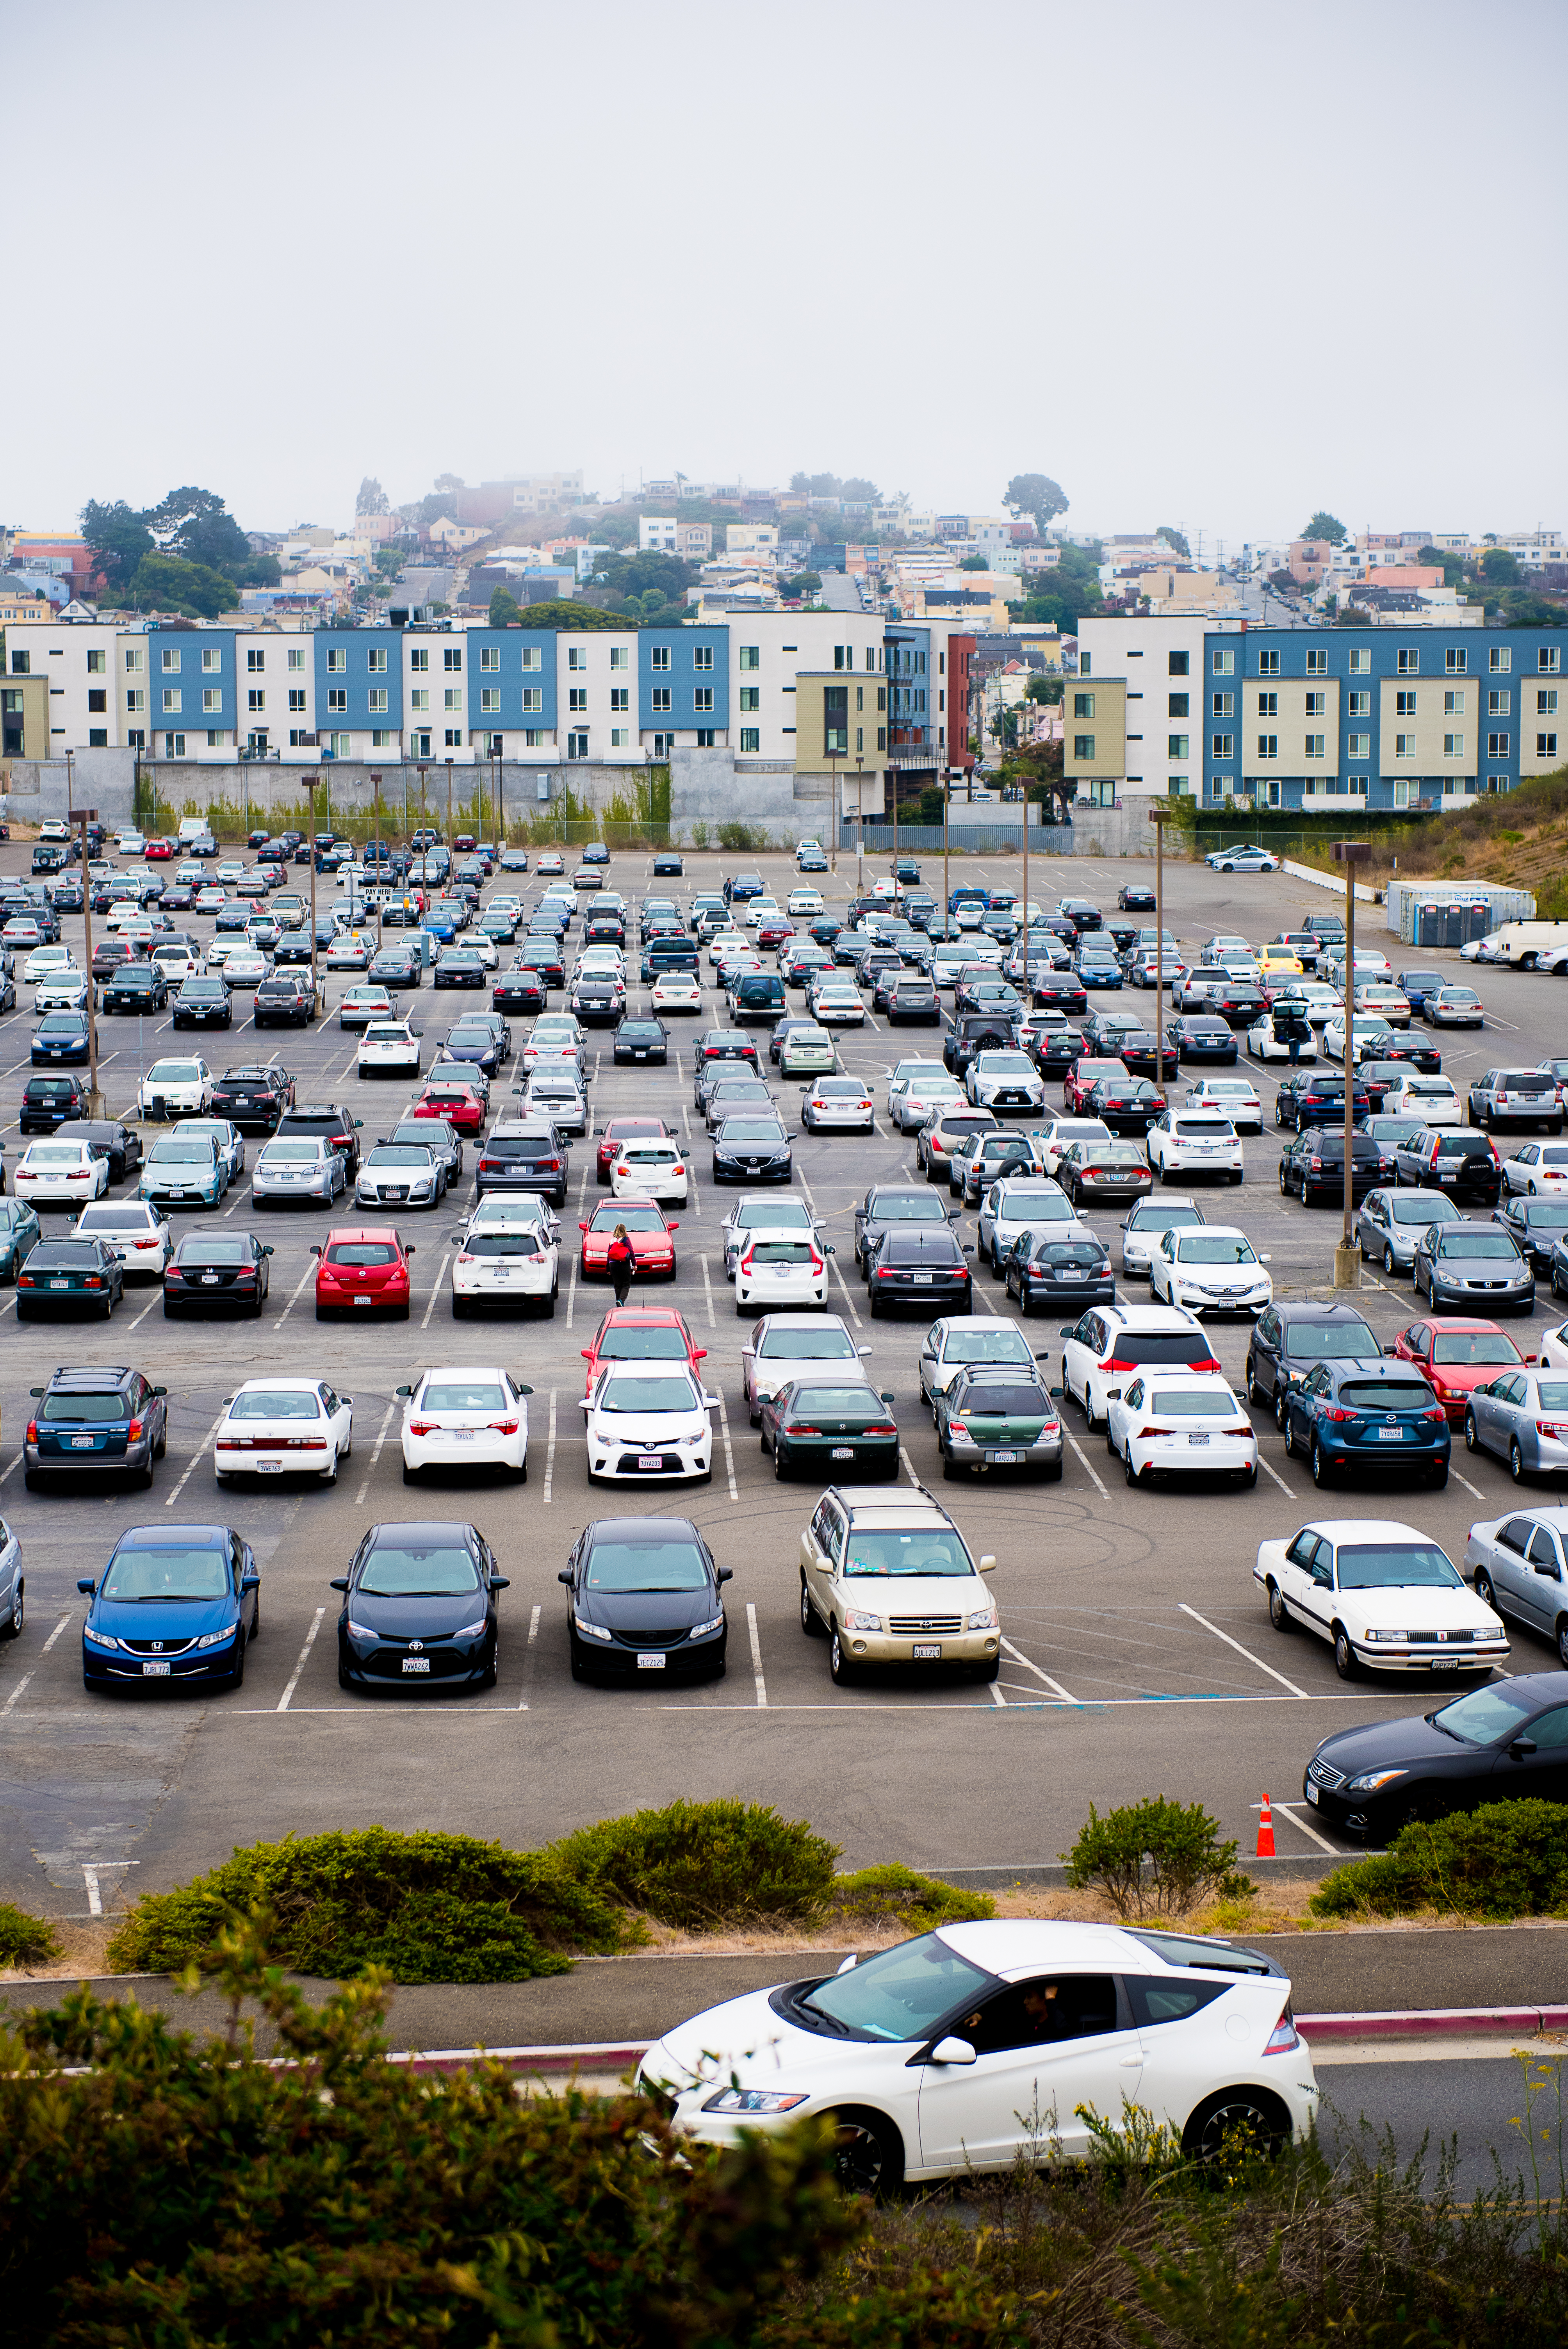 The Balboa Reservoir parking lot nearly full during school hours. Photo taken on Aug. 28, 2017 by Otto Pippenger.